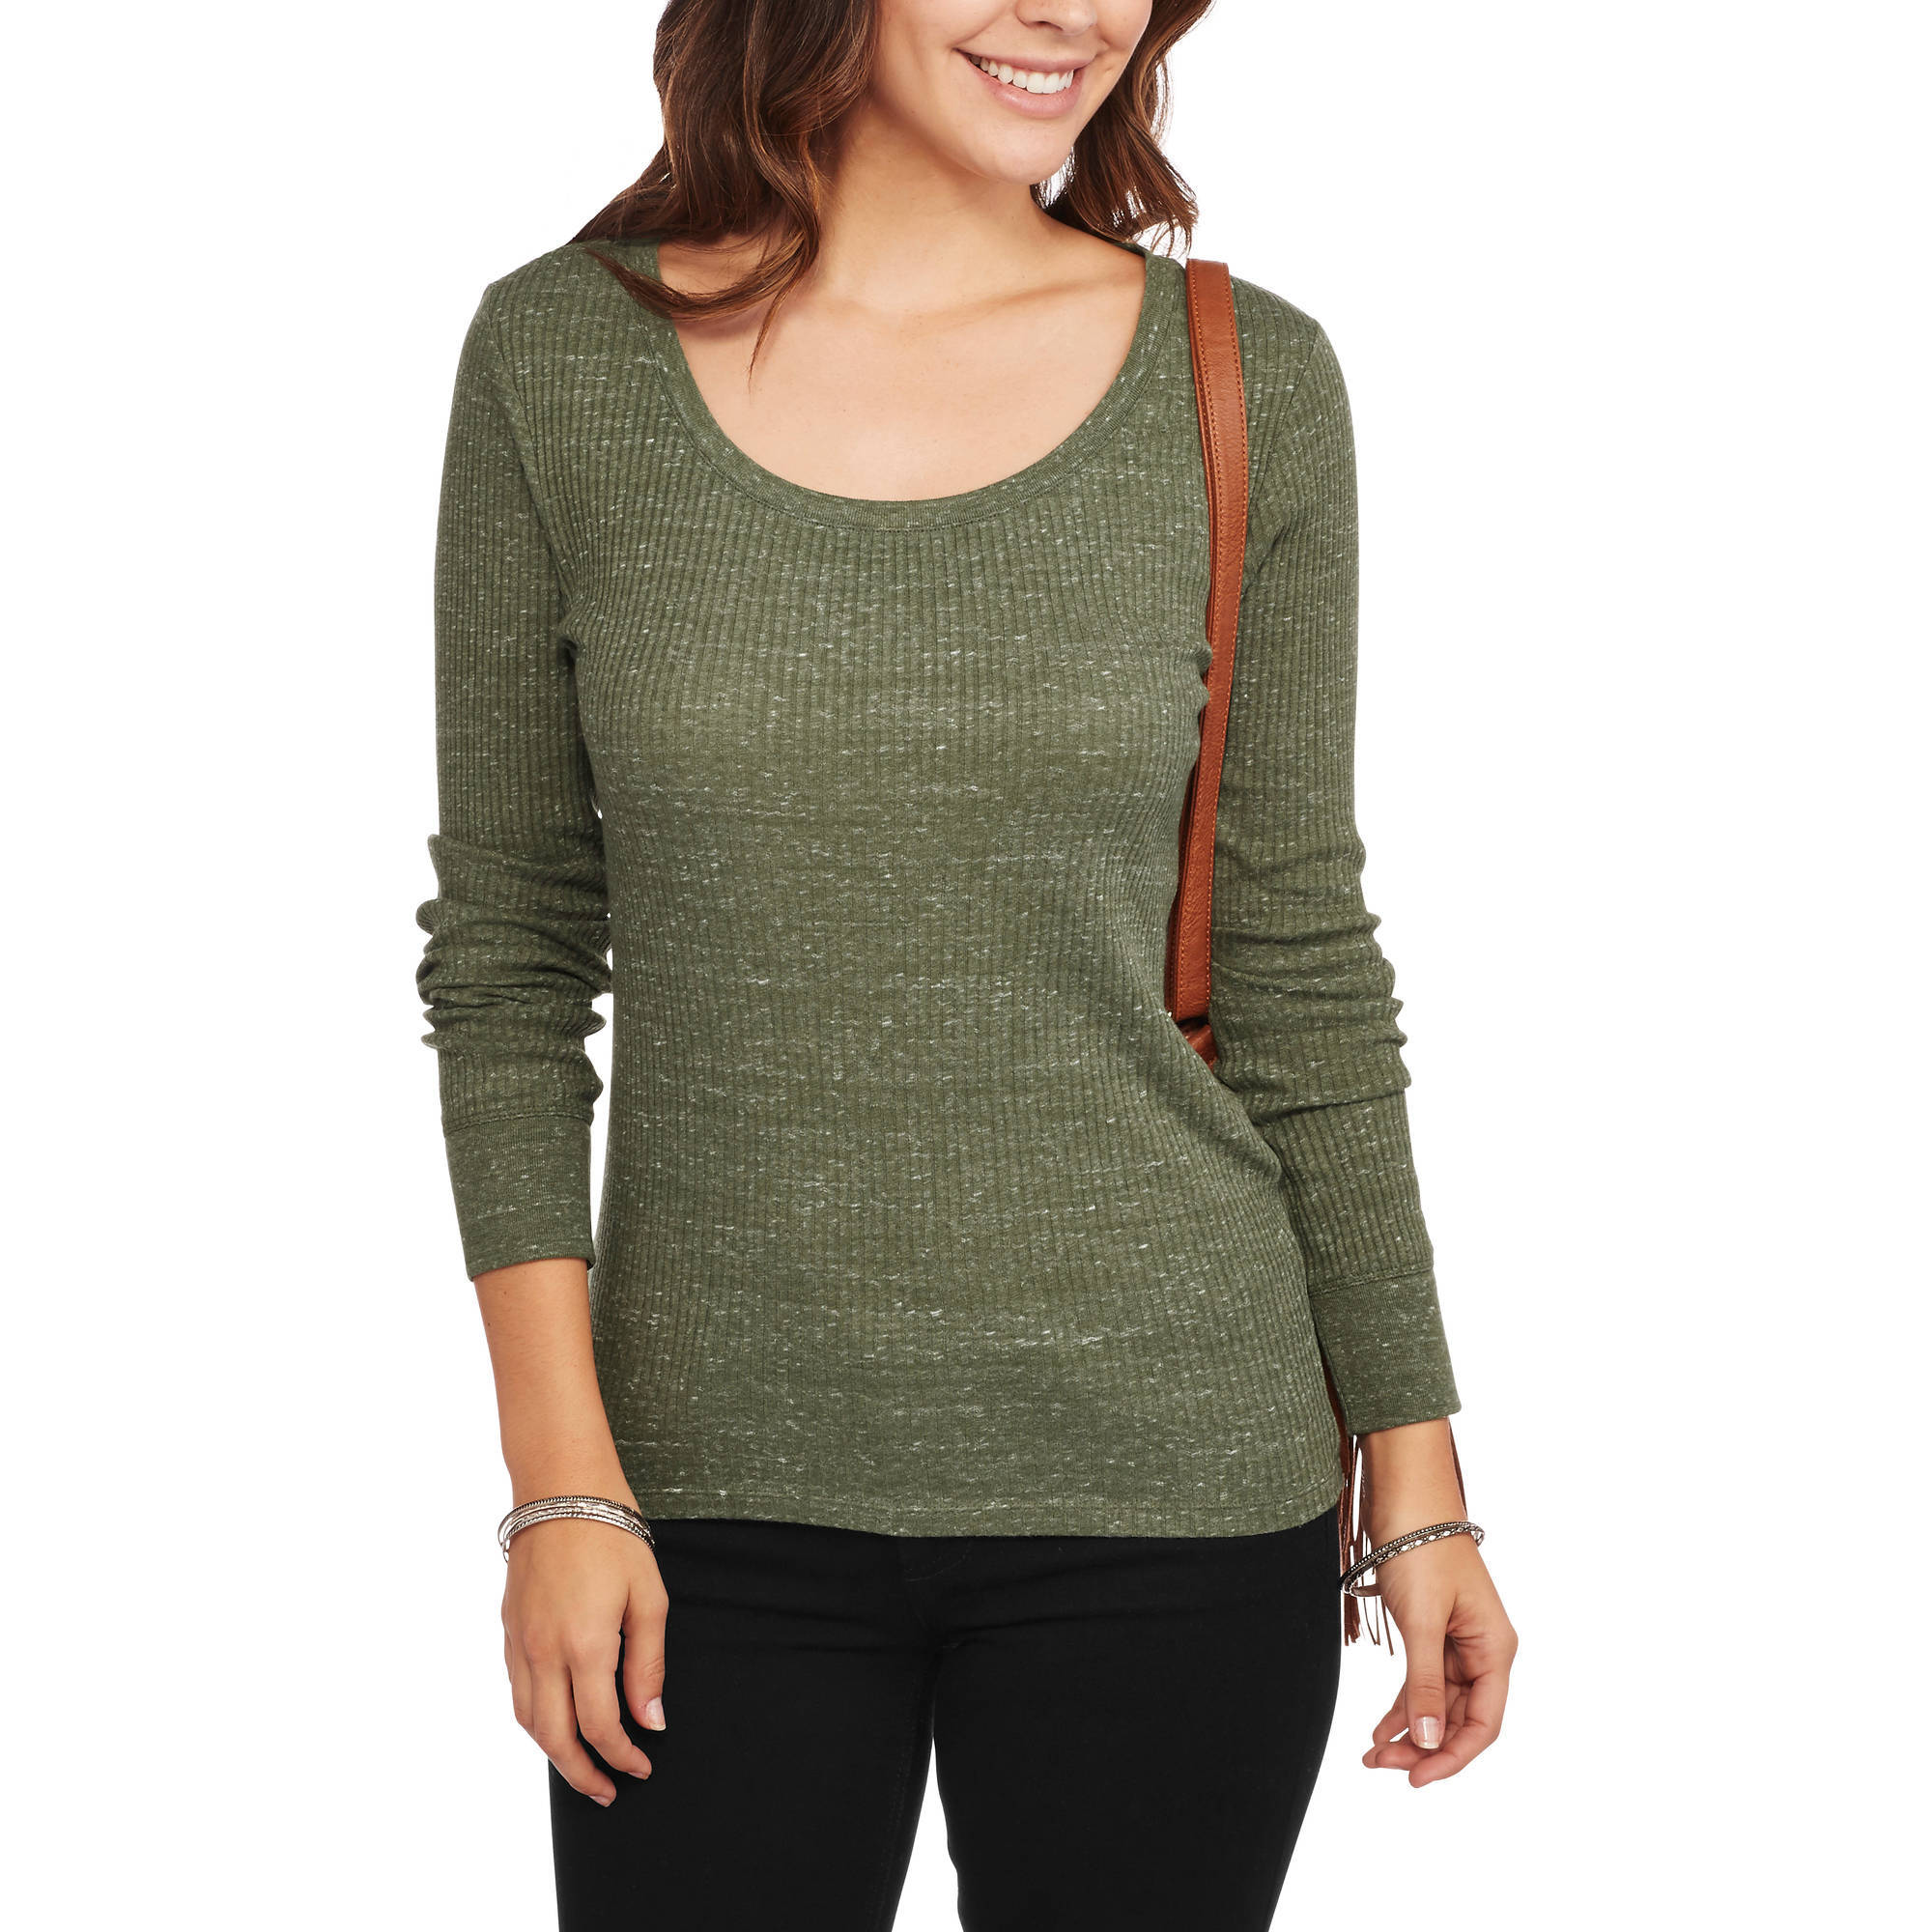 Women's Ribbed Long Sleeve Scoopneck T-Shirt - image 1 of 2